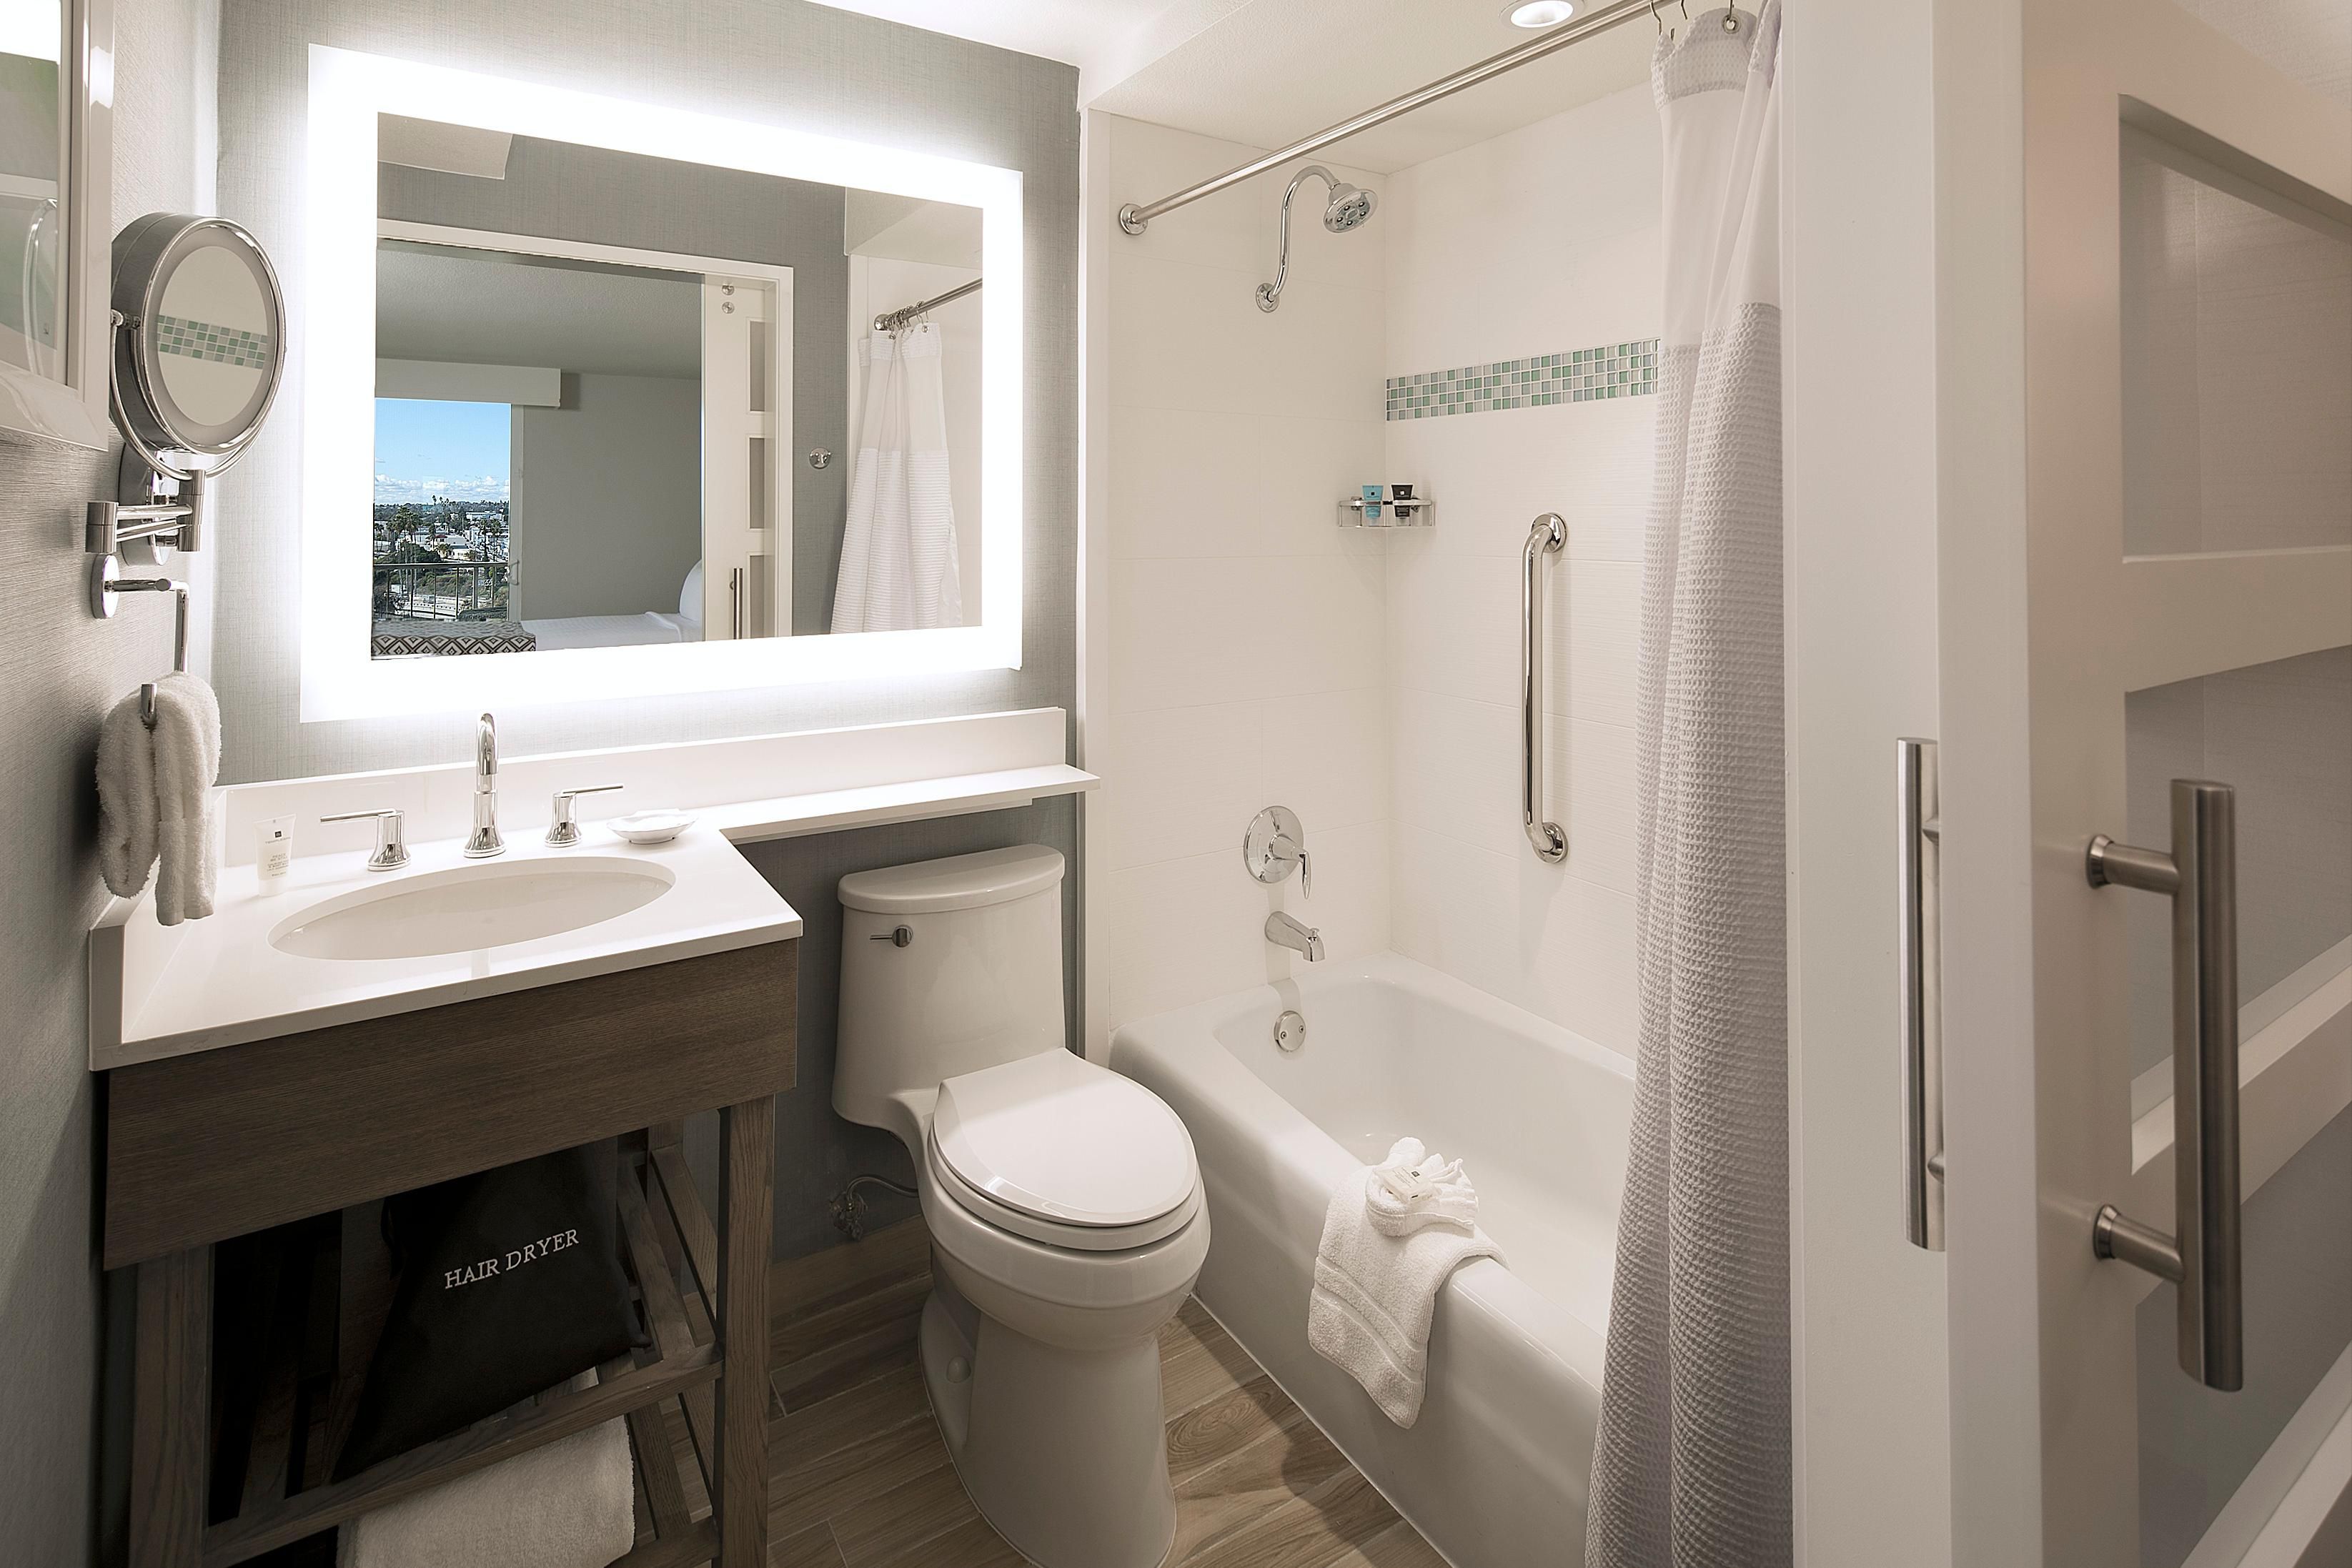 2 Queen Room Bathroom with shower and bathtub